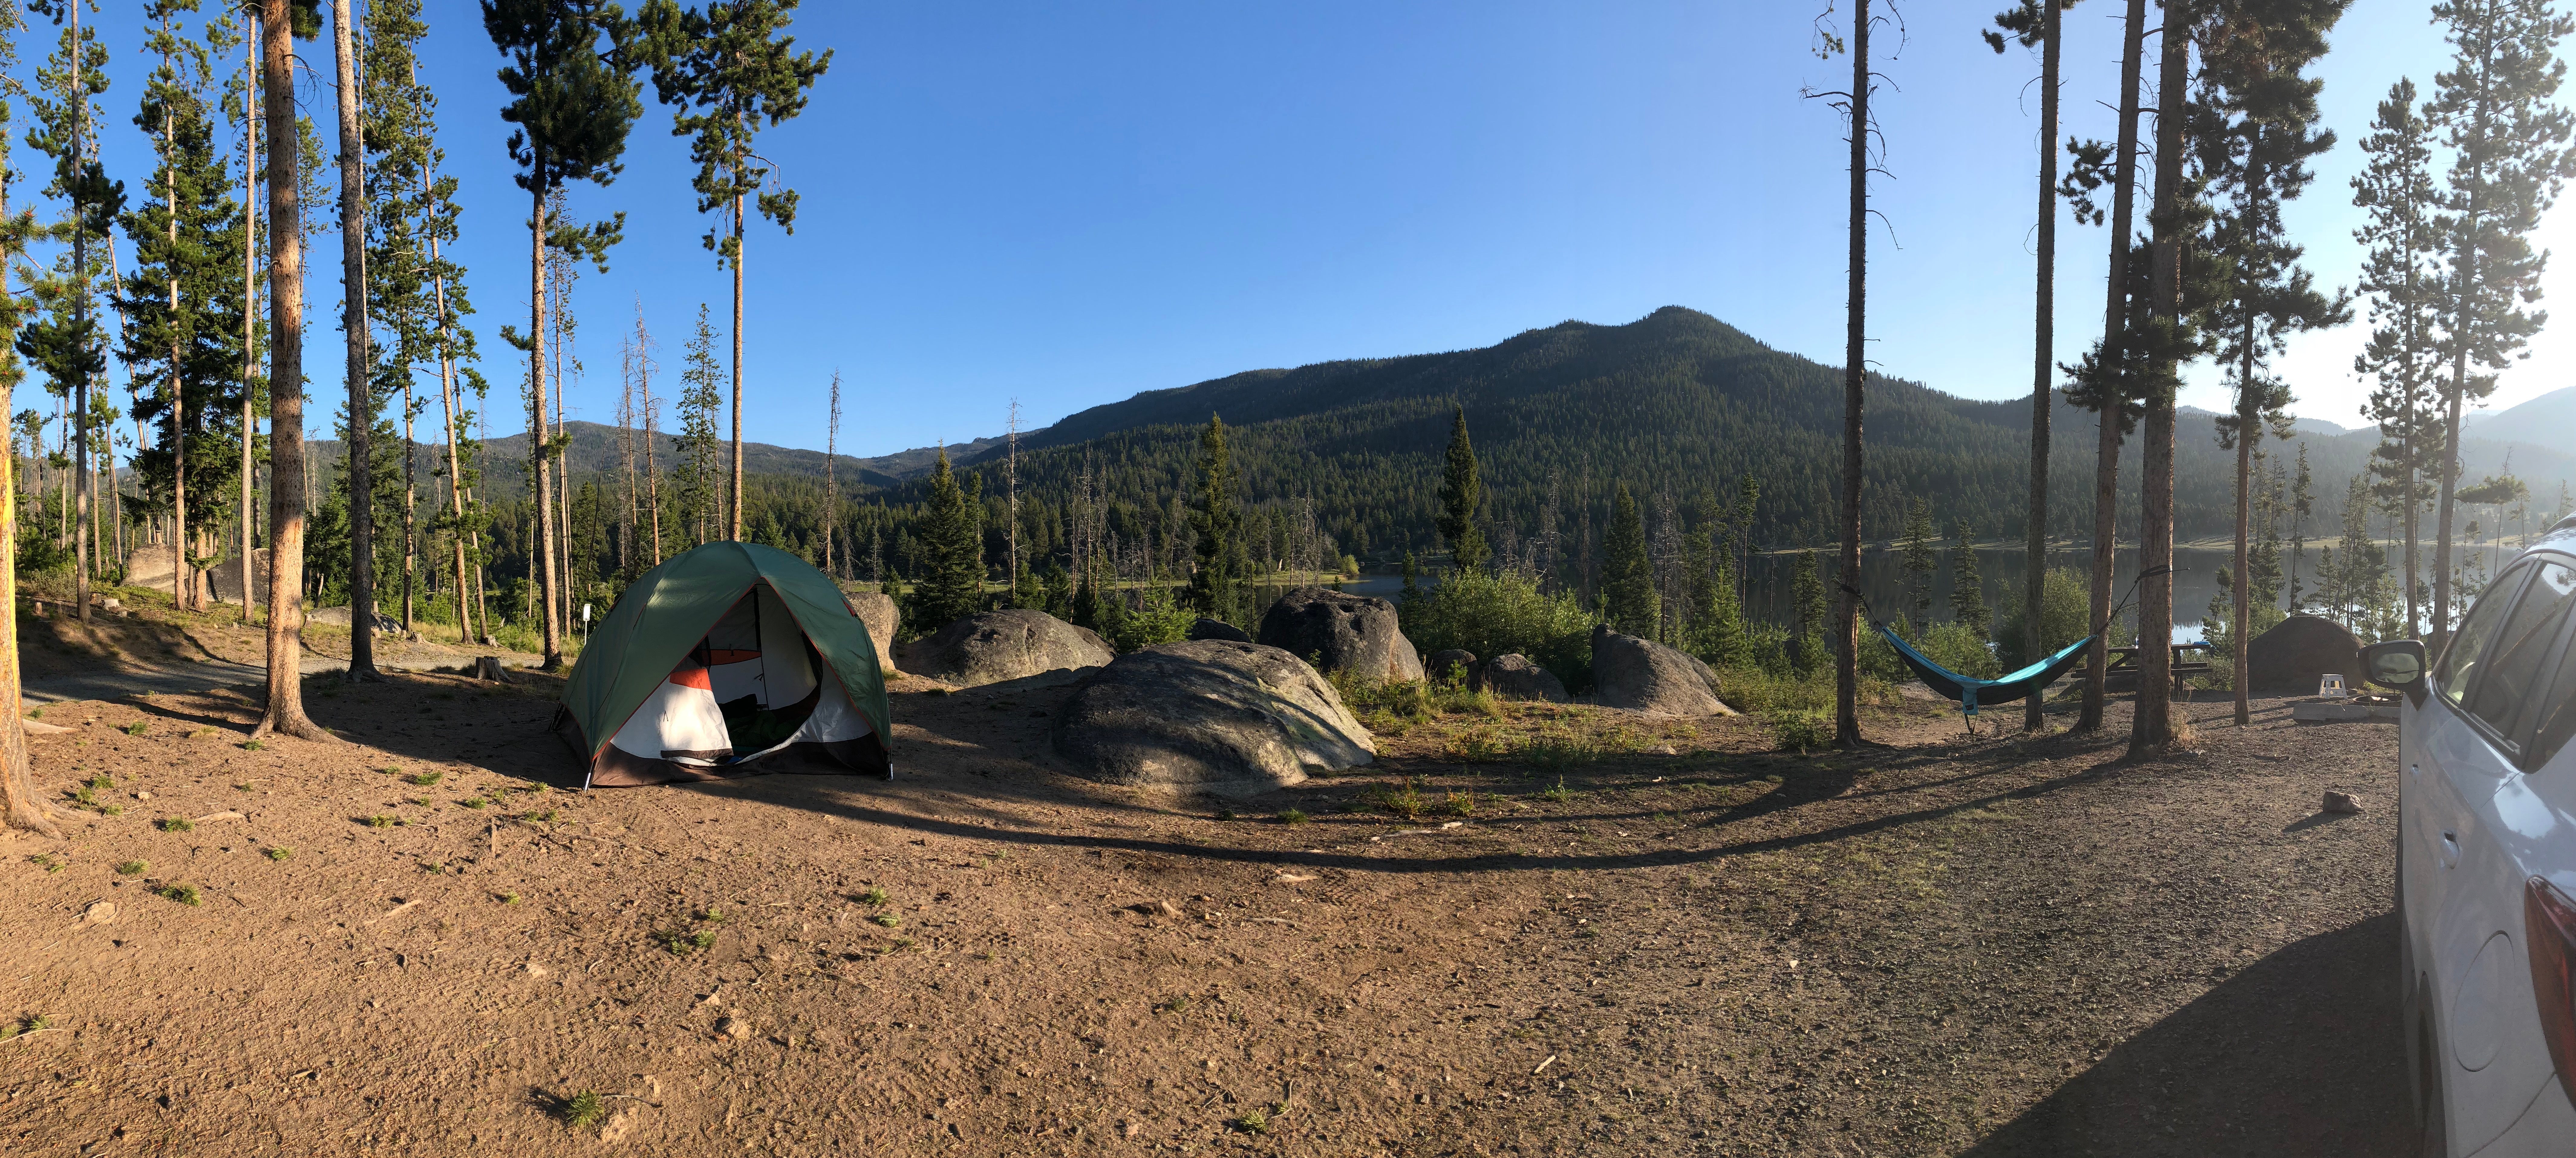 Large site with flat place for a tent, many trees for hammocks, and large picnic table next to fire ring